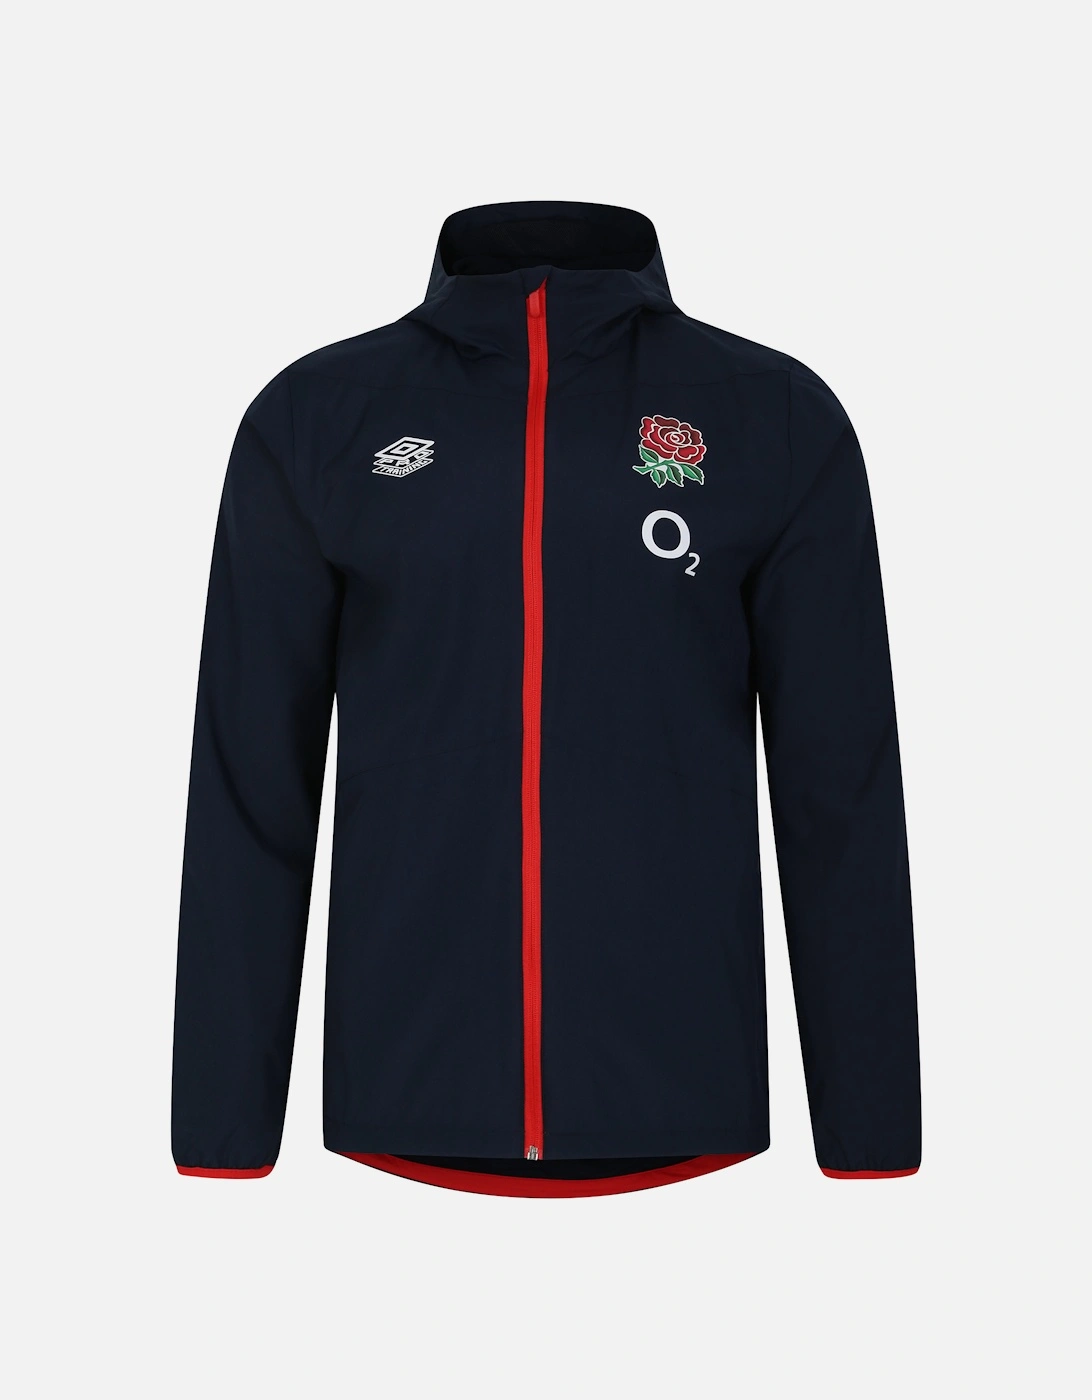 Mens 23/24 England Rugby Track Jacket, 6 of 5